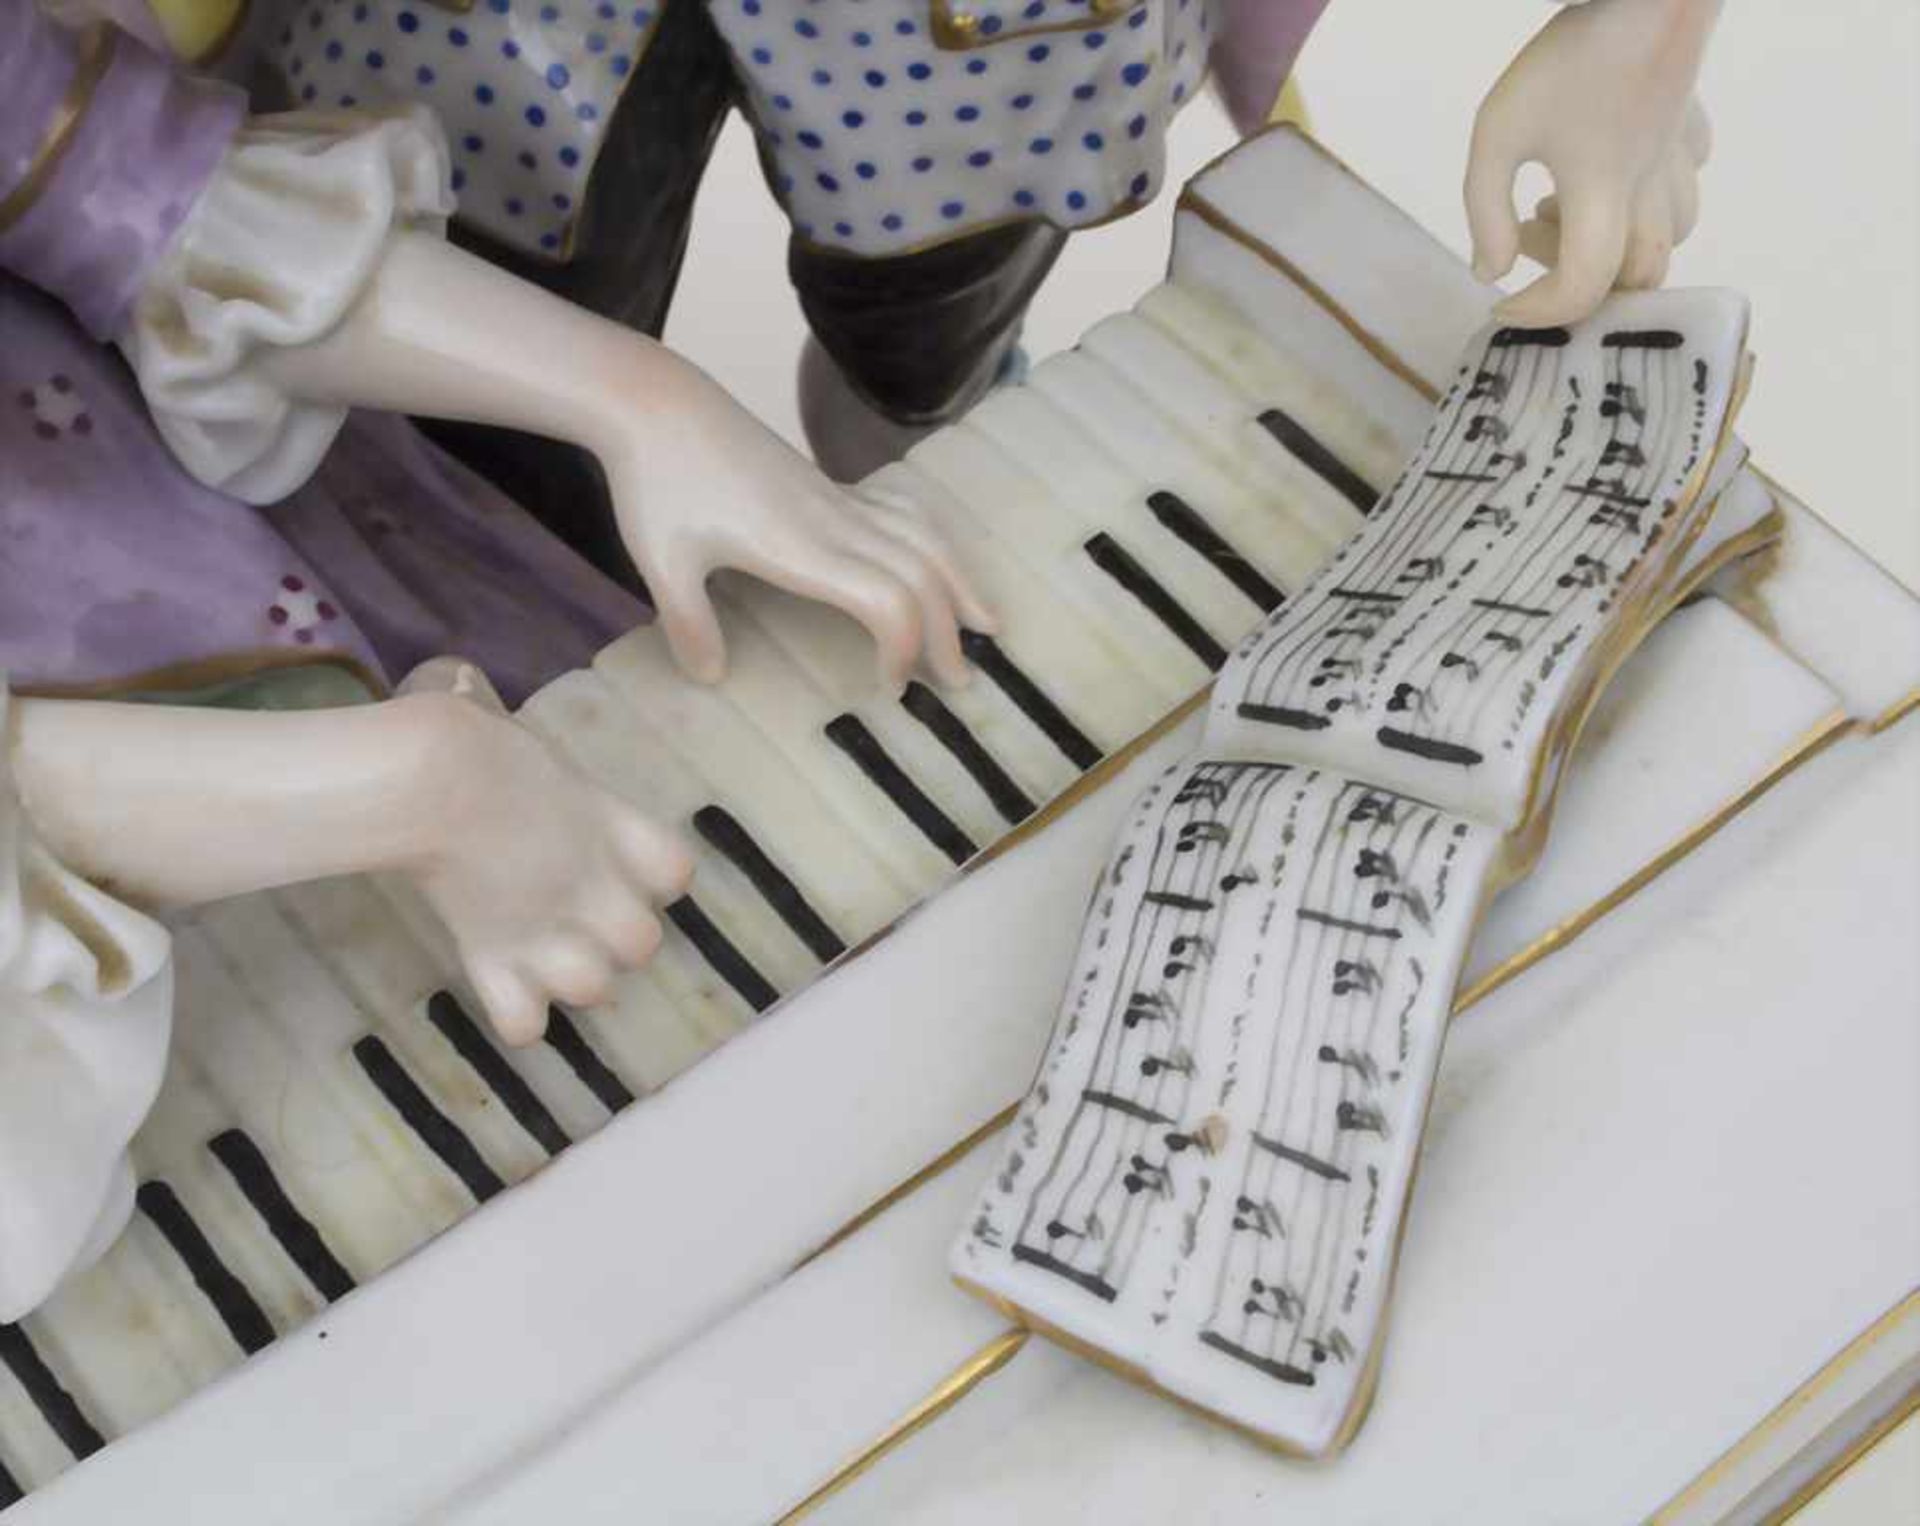 Figurengruppe 'Die Klavierstunde' / A figural group 'The piano lesson', Aelteste Volkstedt- - Image 7 of 9